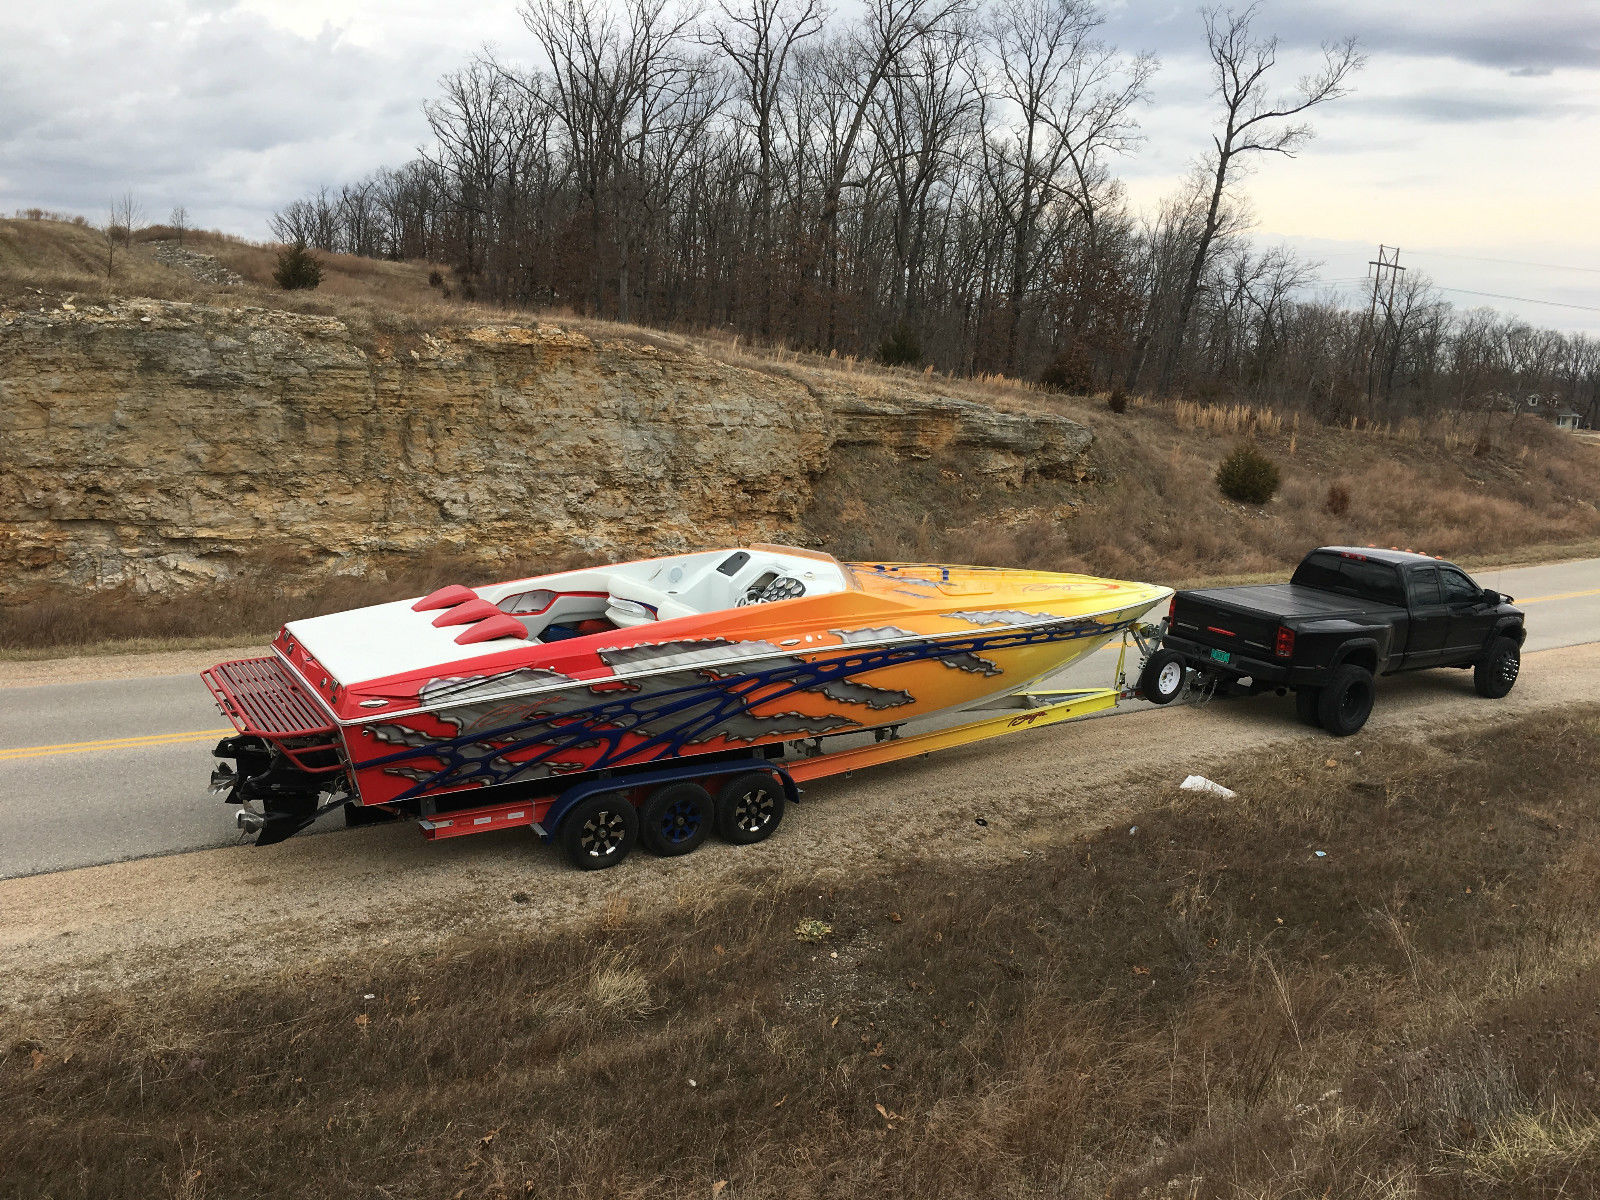 Baja Outlaw 35 2007 for sale for $85,000.